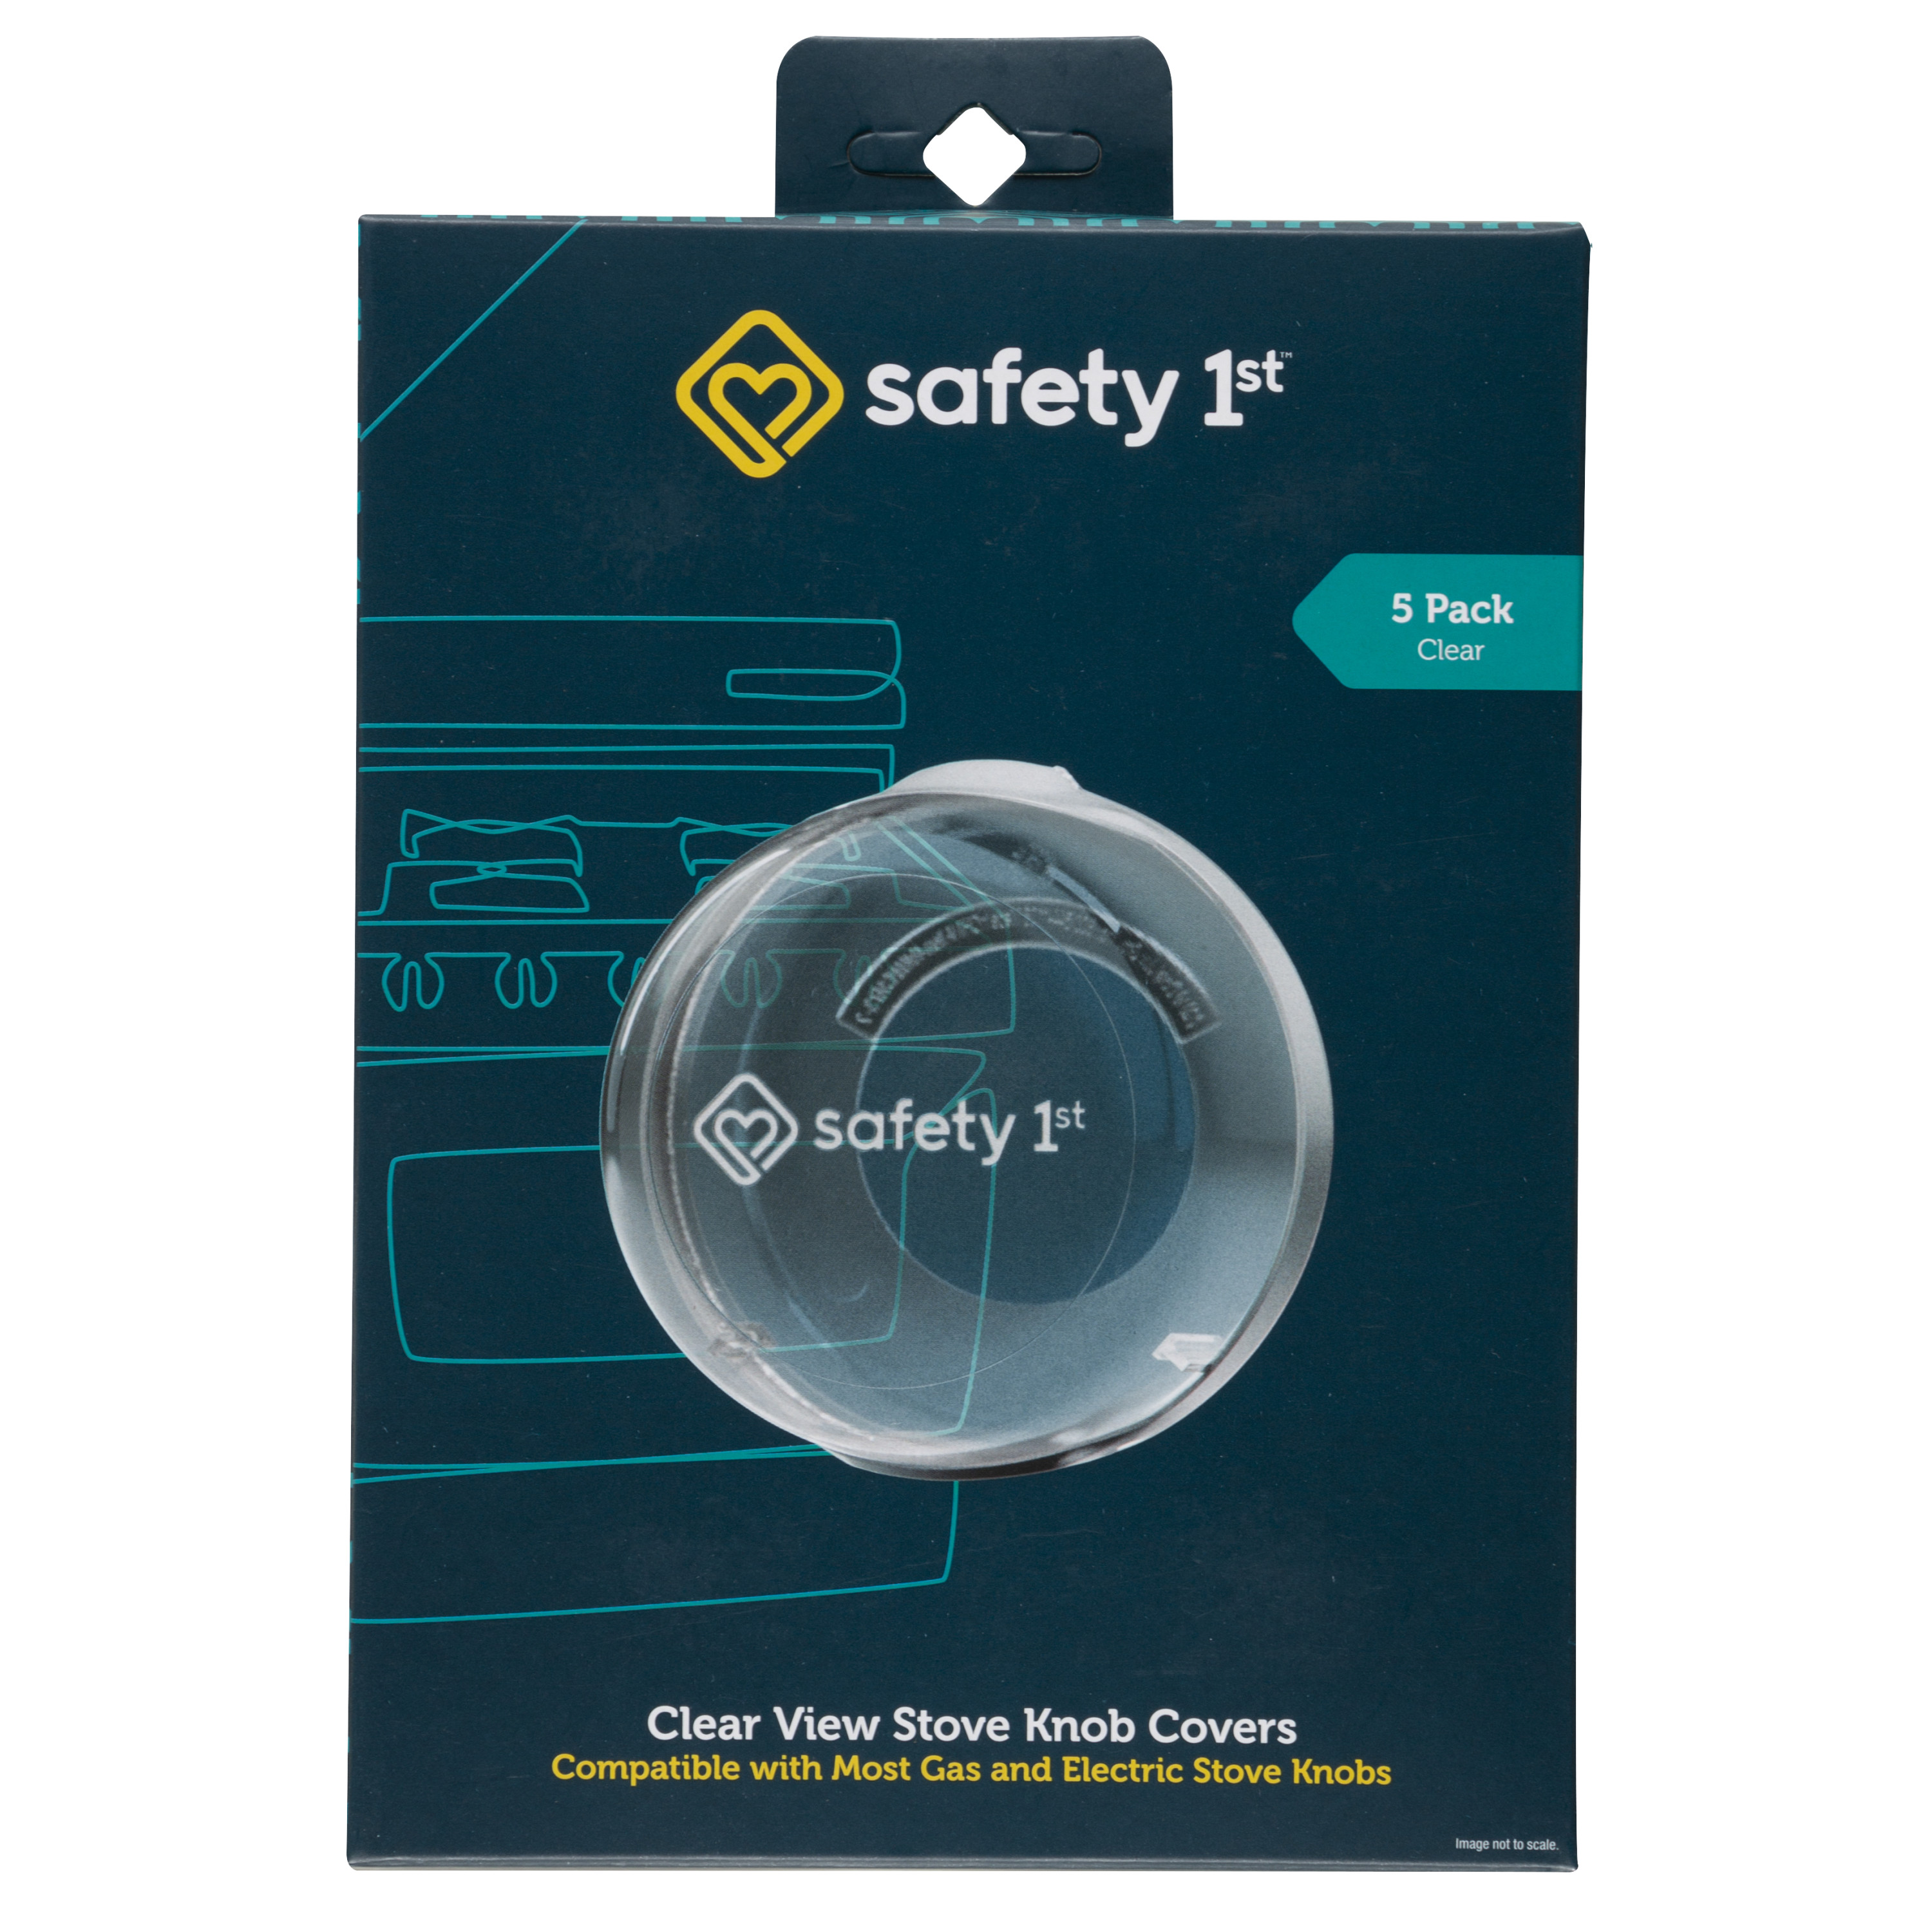 Safety 1ˢᵗ Clear View Stove Knob Covers (5 Pack), Clear - image 1 of 10